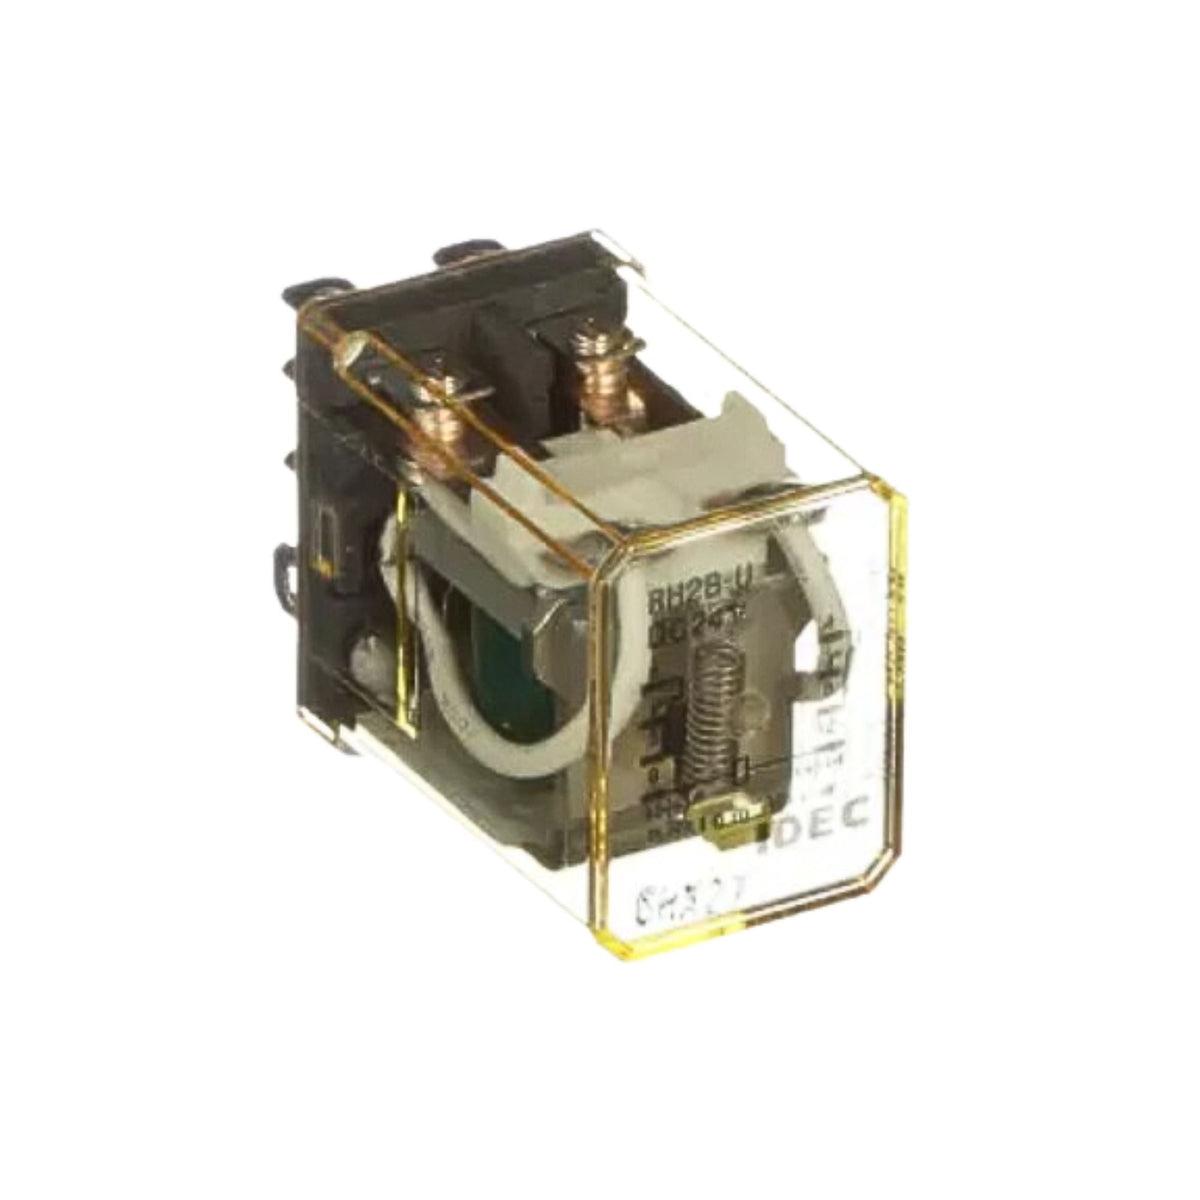 Ice Cube Relay | RH2B-UDC24V used on Idec product line - Front view